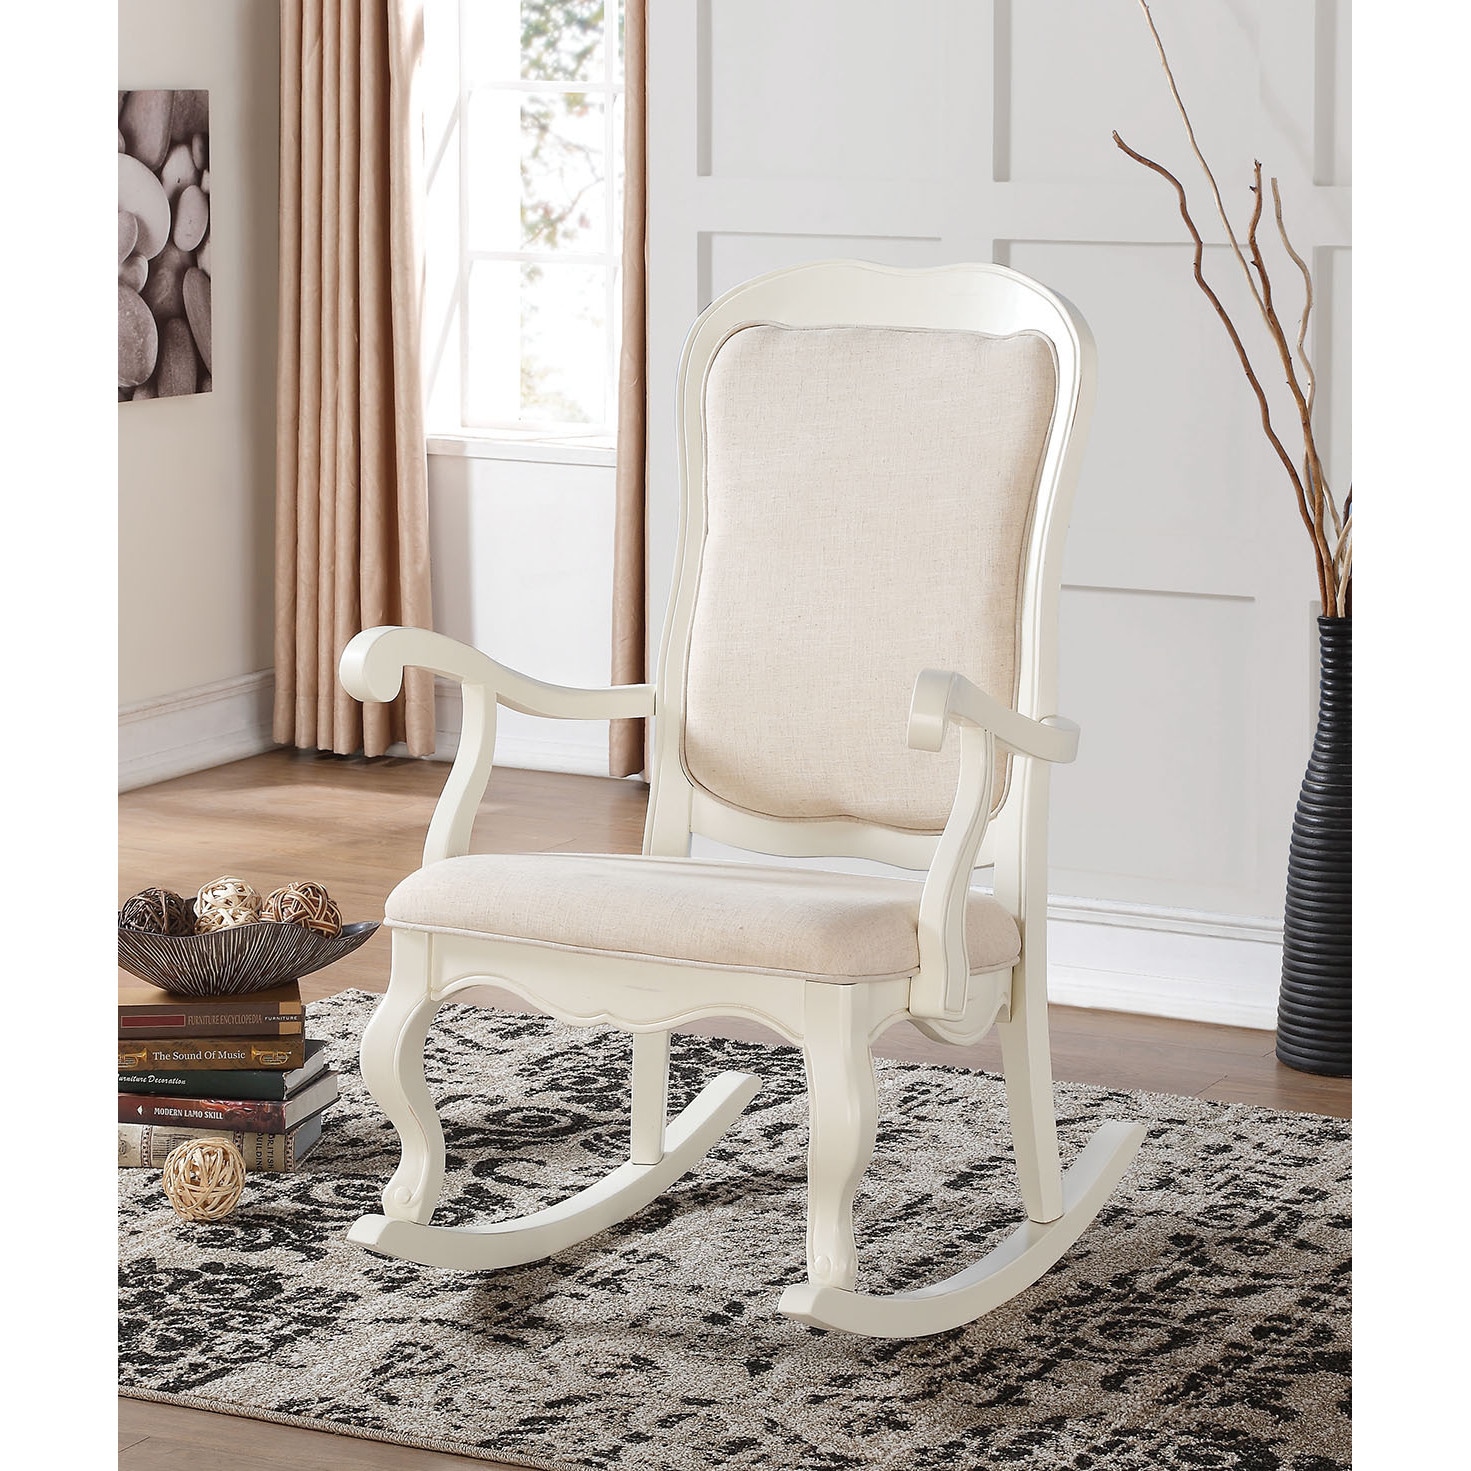 Shop Sharan Antique White Wooden Rocking Chair On Sale Overstock 12021420